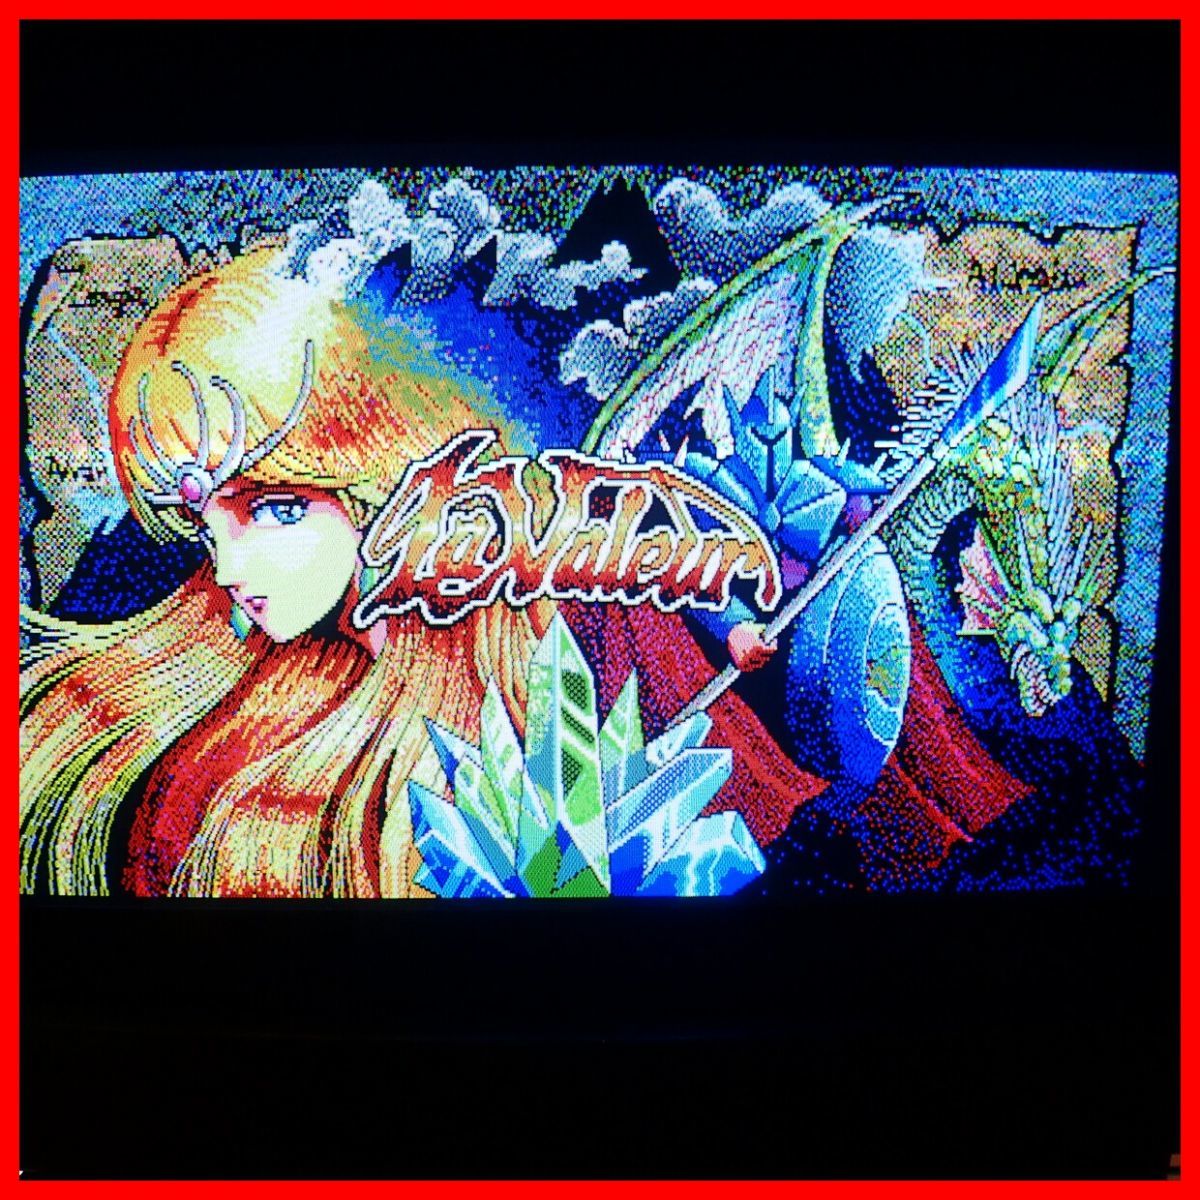 PC-9801 PC98 La Valeur, Game FDDs w/Manual and Box set, Working 